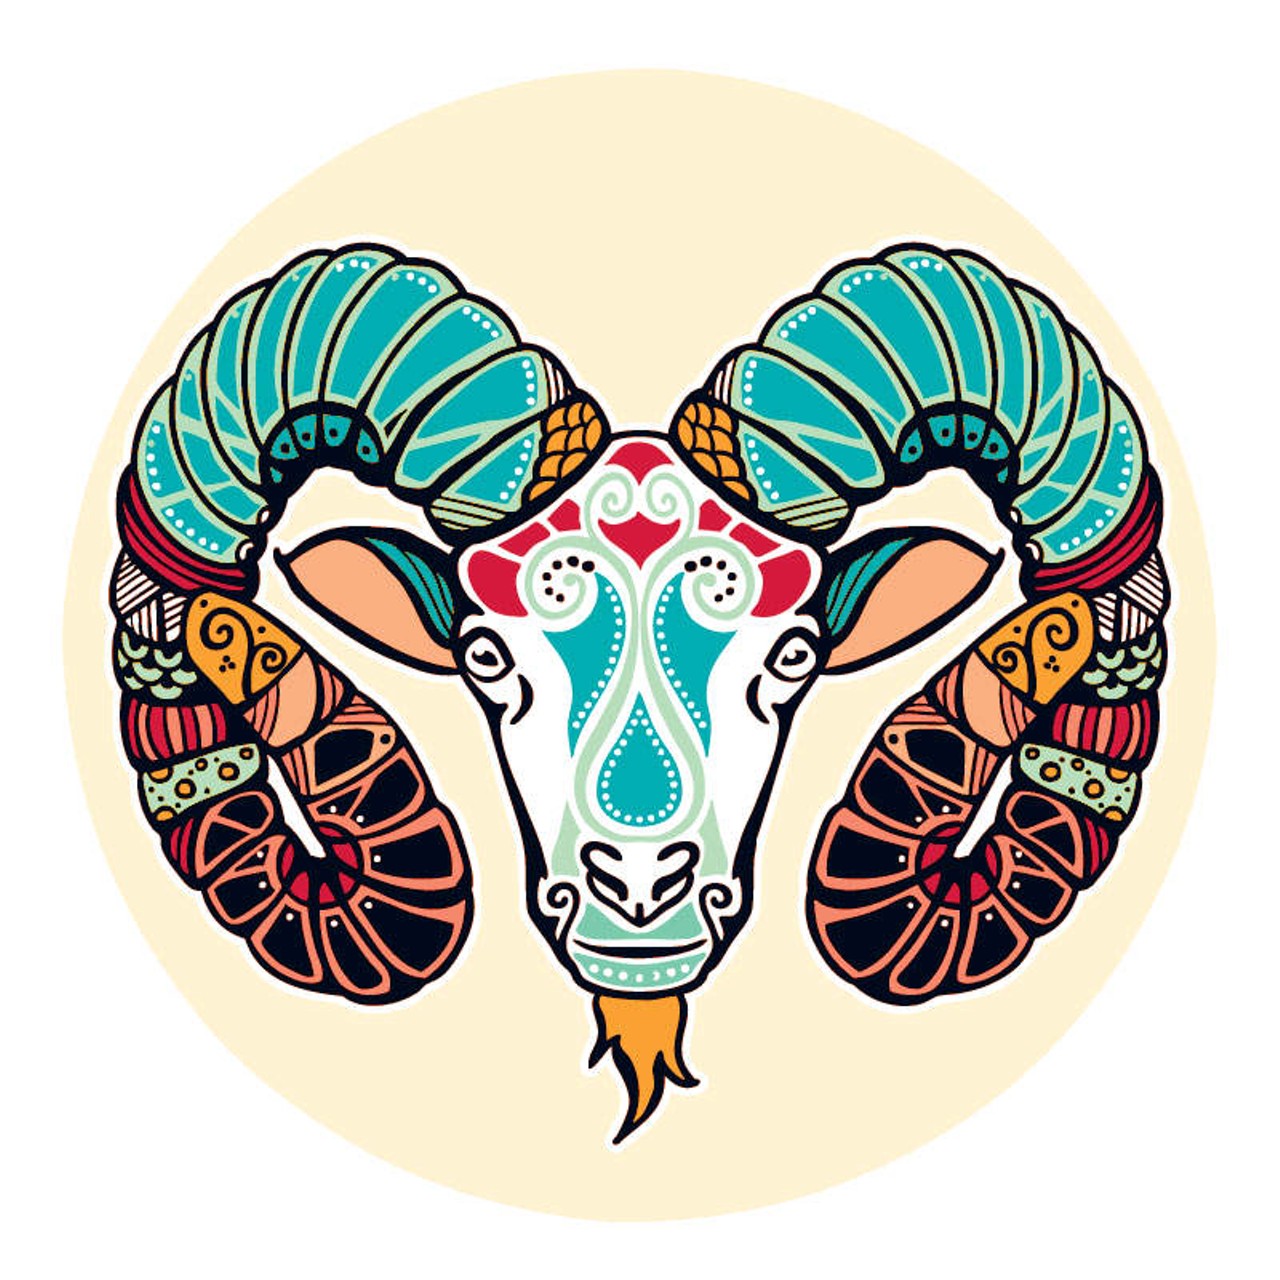 ARIES (March 21- April 20): 
Hanging on for dear life is taking every ounce of energy that&#146;s in you. With hardly anything left to keep you afloat, the sheer force of your will is doing its best to make a go of it. The ones who could be of assistance are few and far between. Those who are still close to you are more like tits on a bull. It always comes down to understanding that you get further along the path when you are clear about the fact that you are the proud owner of whatever it takes to go it alone. Keep reinforcing your sense of strength and independence. Those who care need to understand this.